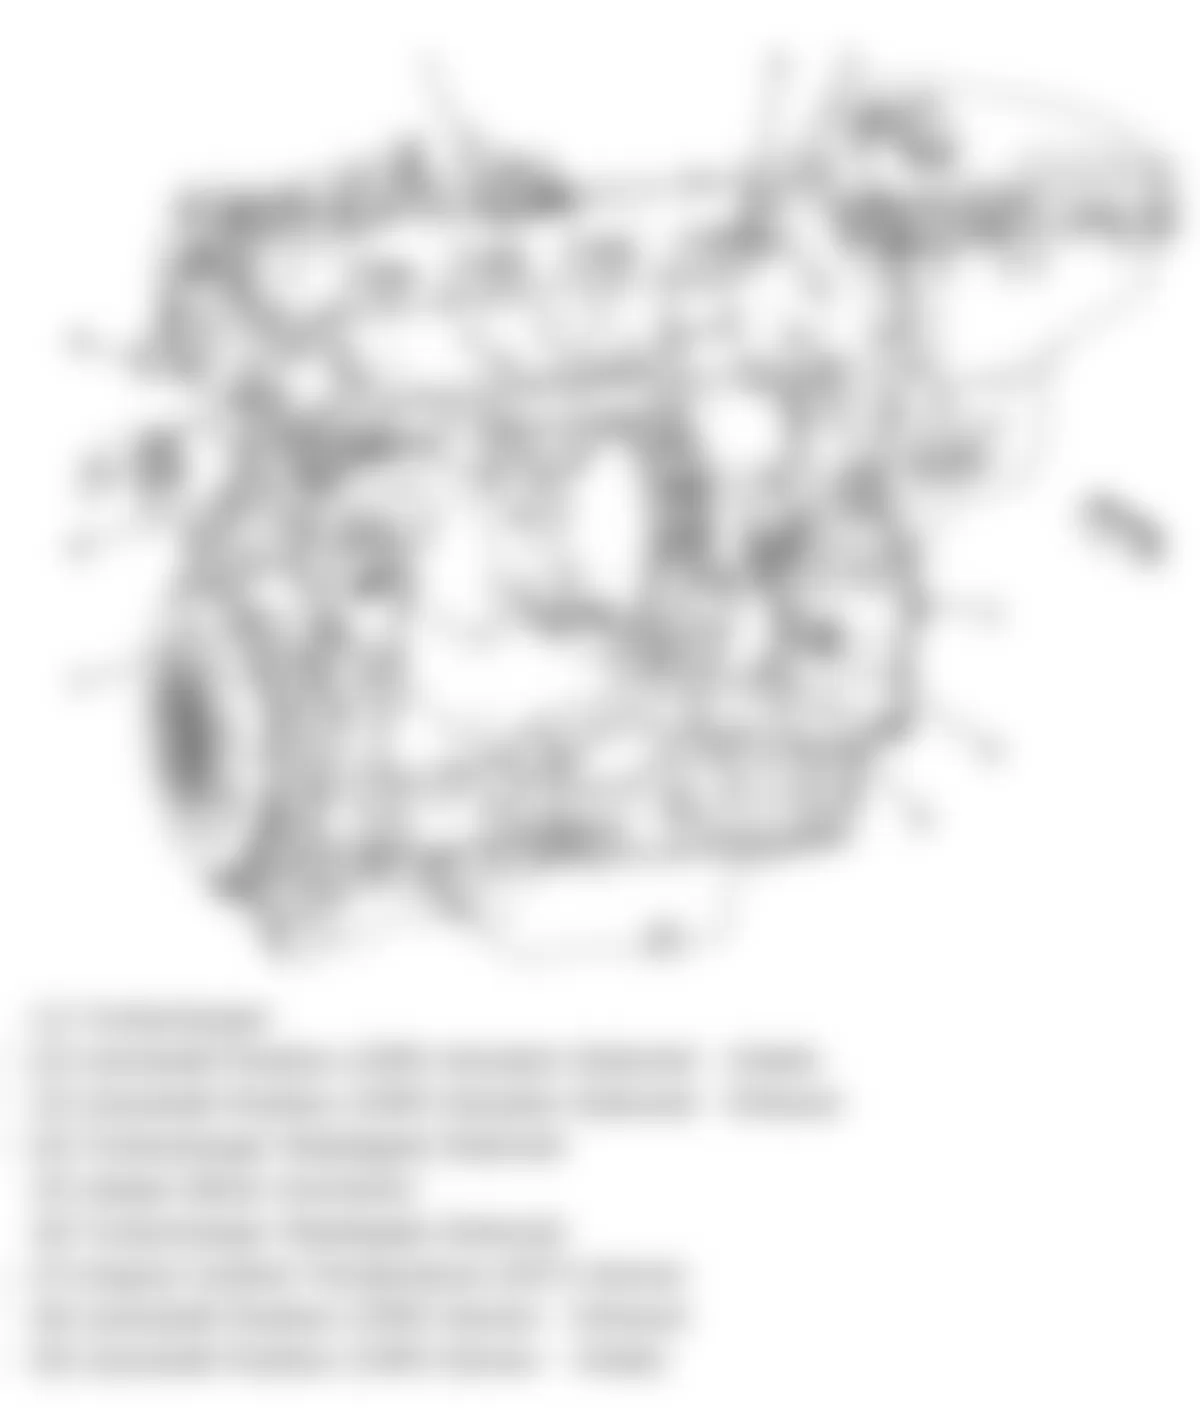 Chevrolet Cobalt LT 2009 - Component Locations -  Rear Of Engine Assembly (2.0L)